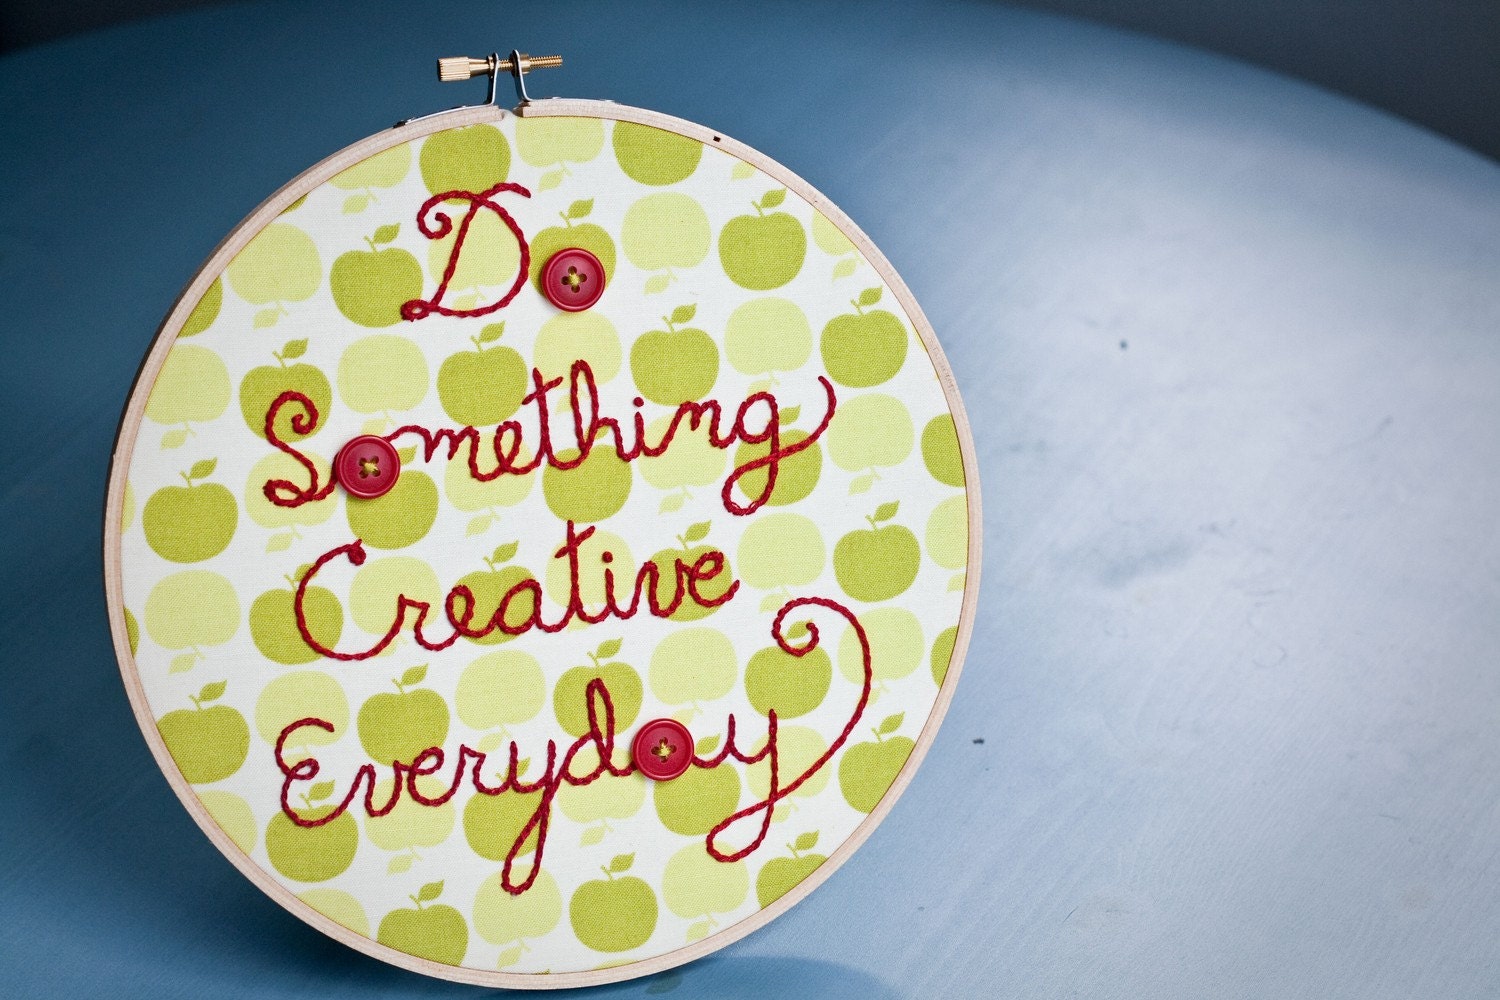 embroidery hoop embroidery motto